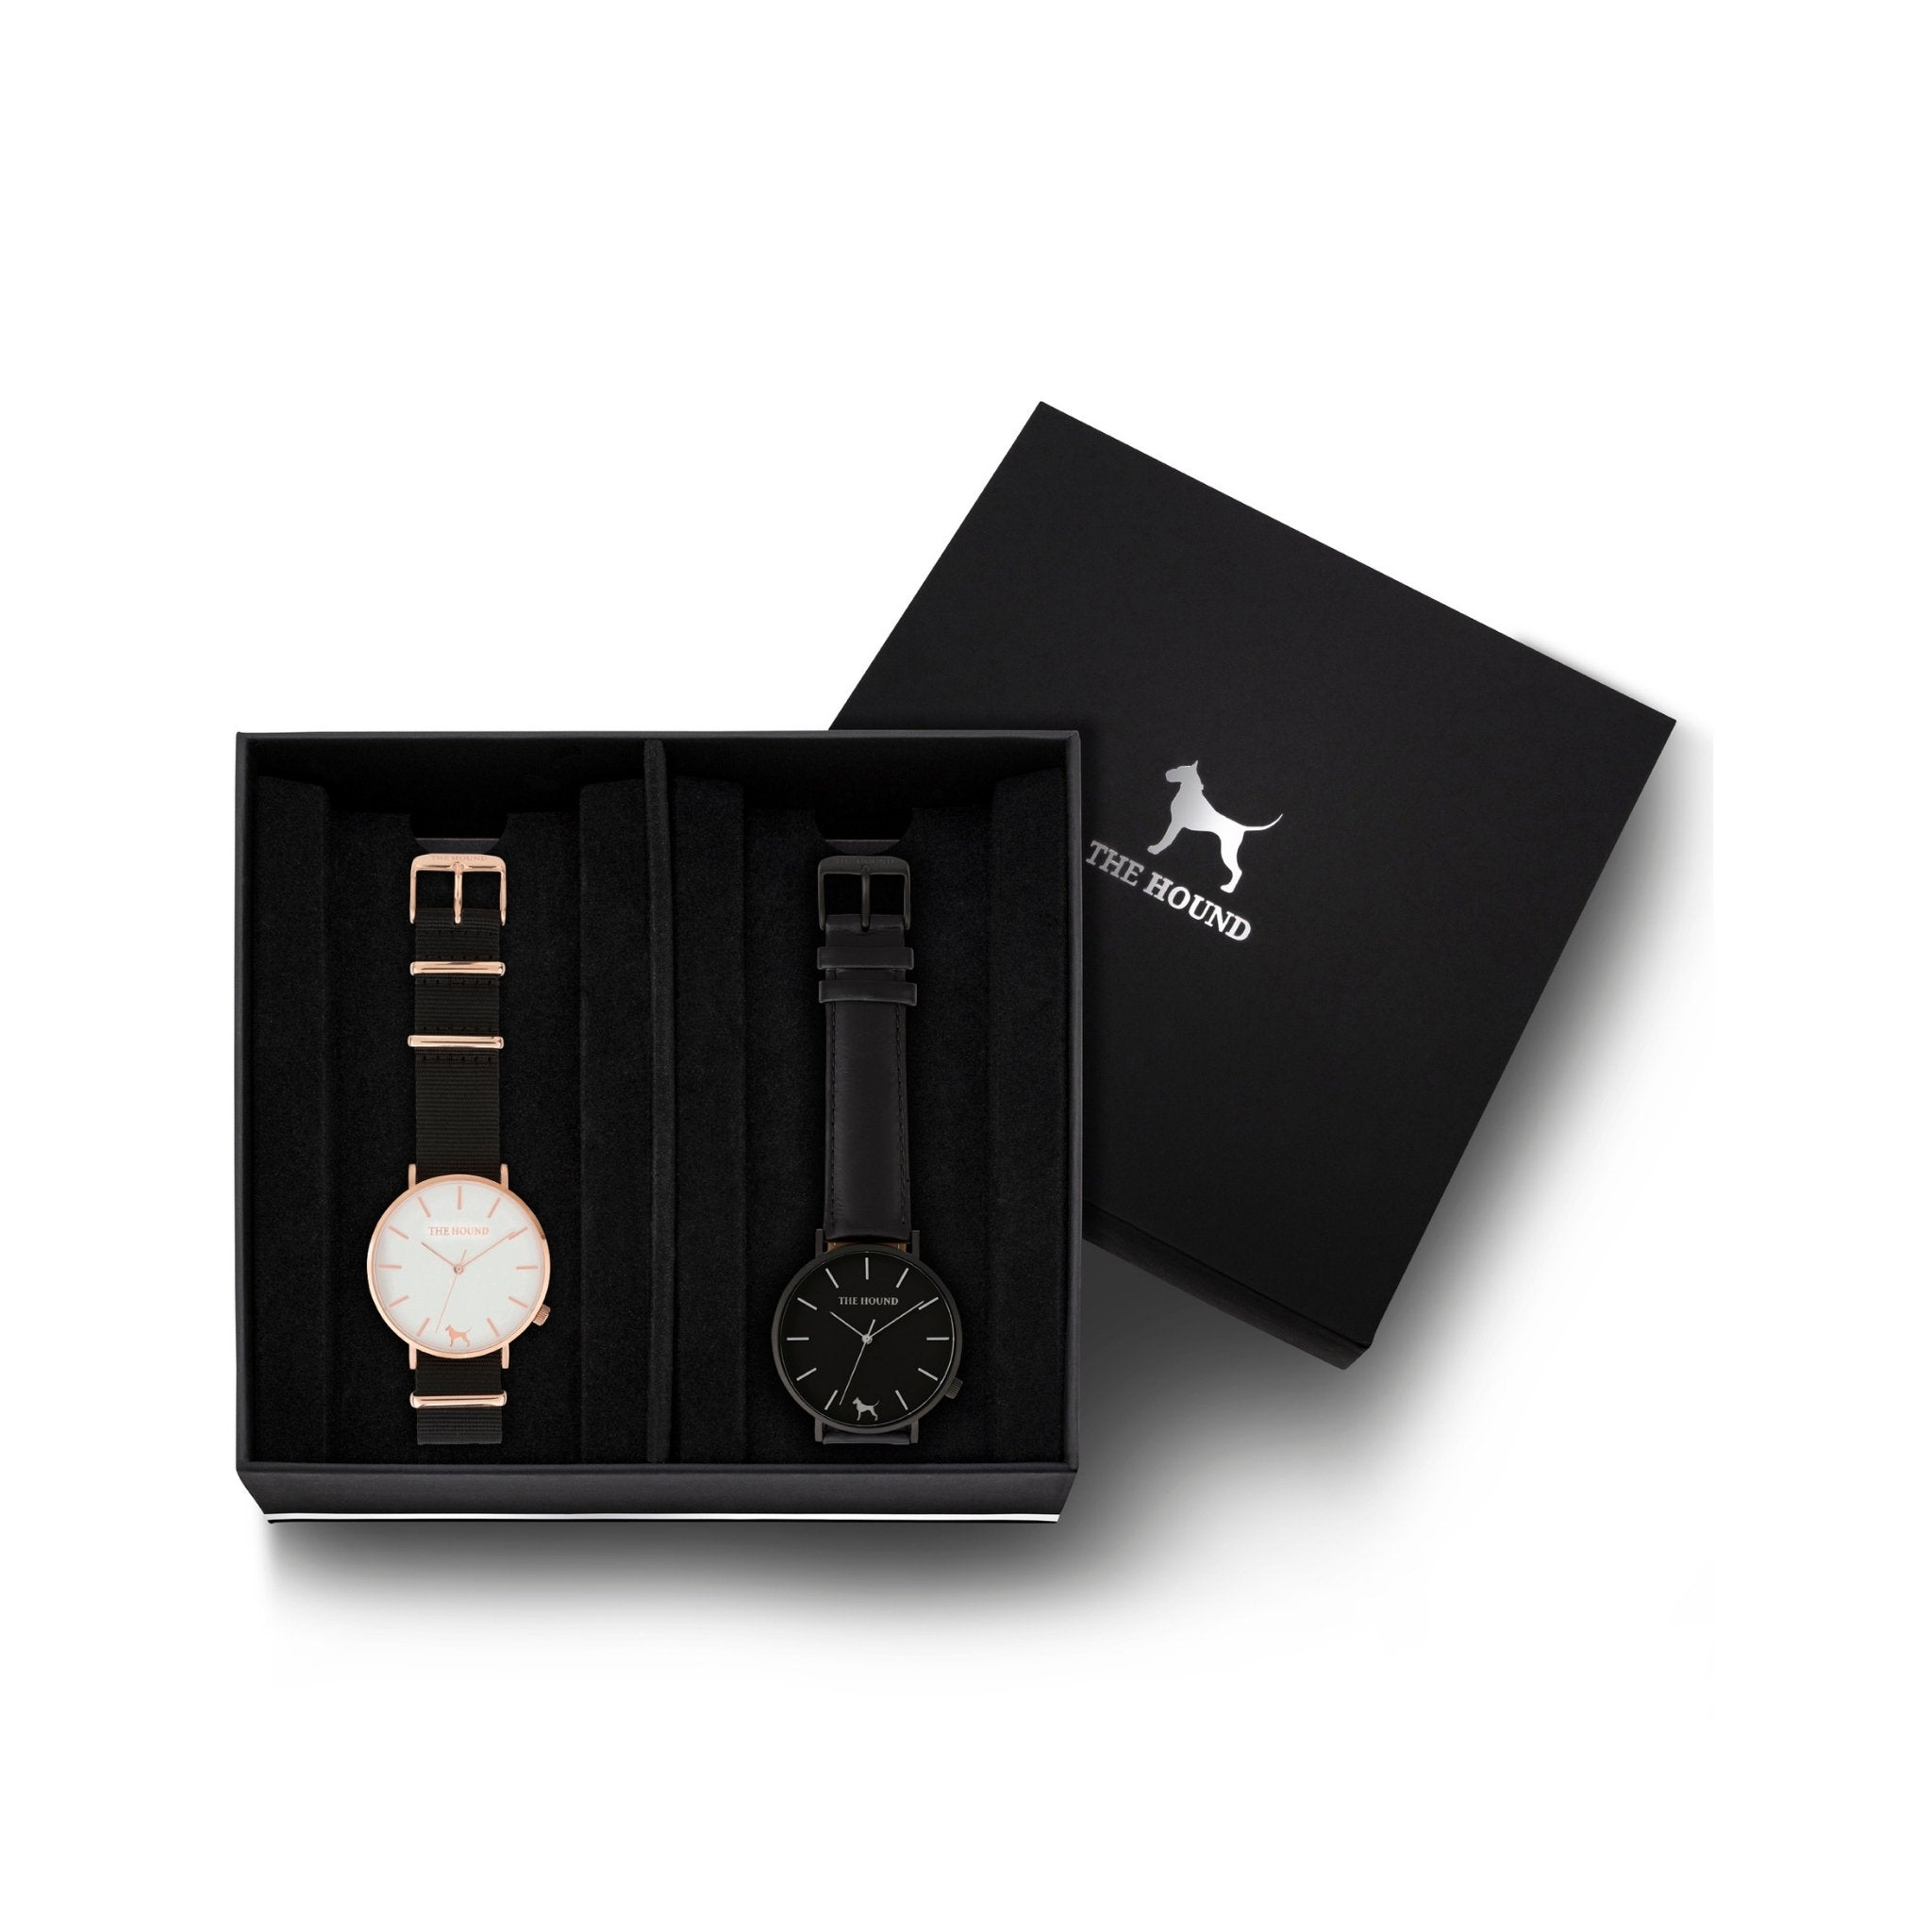 Custom gift set - Rose gold and white watch with black nato band and a matte black and black watch with stitched black genuine leather band